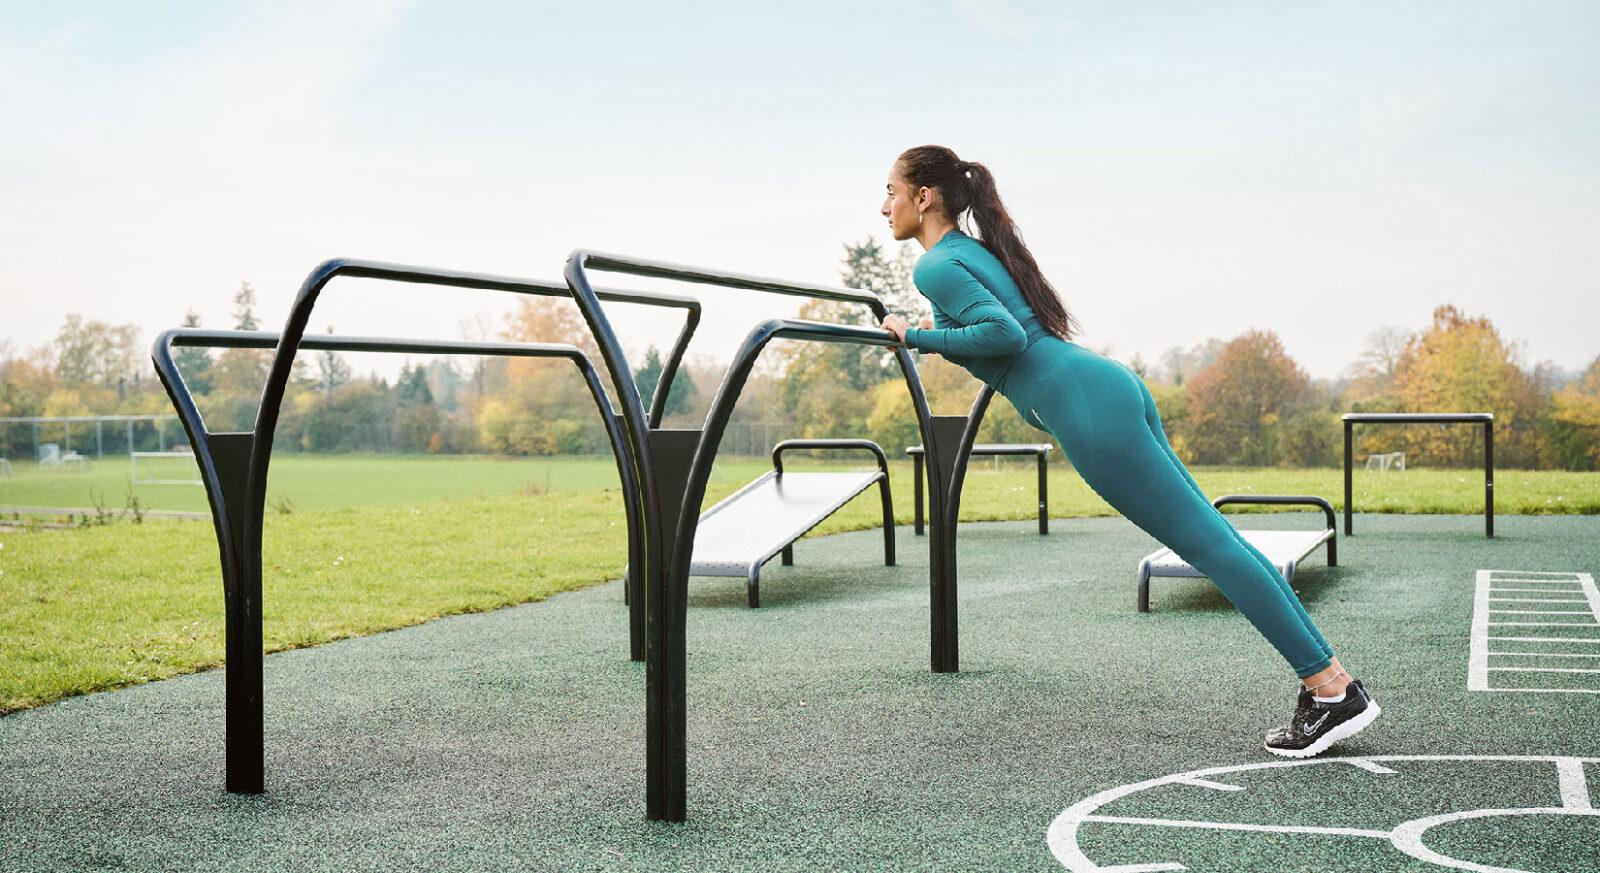 Outdoor fitness area with equipment suitable for anybody. Parallel Bar is usefull for calisthenics workouts.